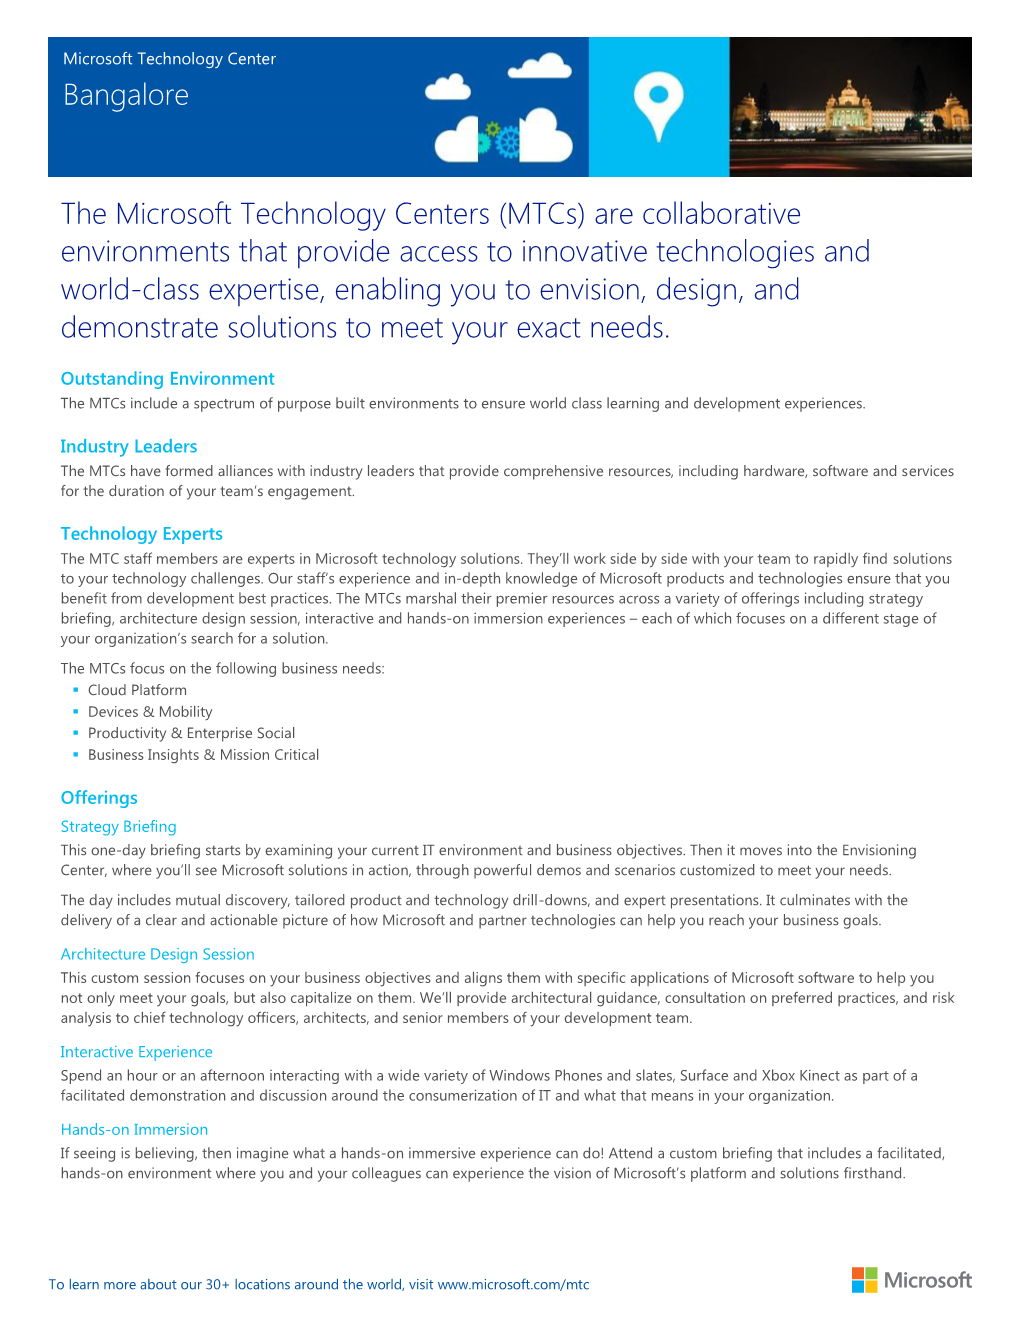 The Microsoft Technology Centers (Mtcs) Are Collaborative